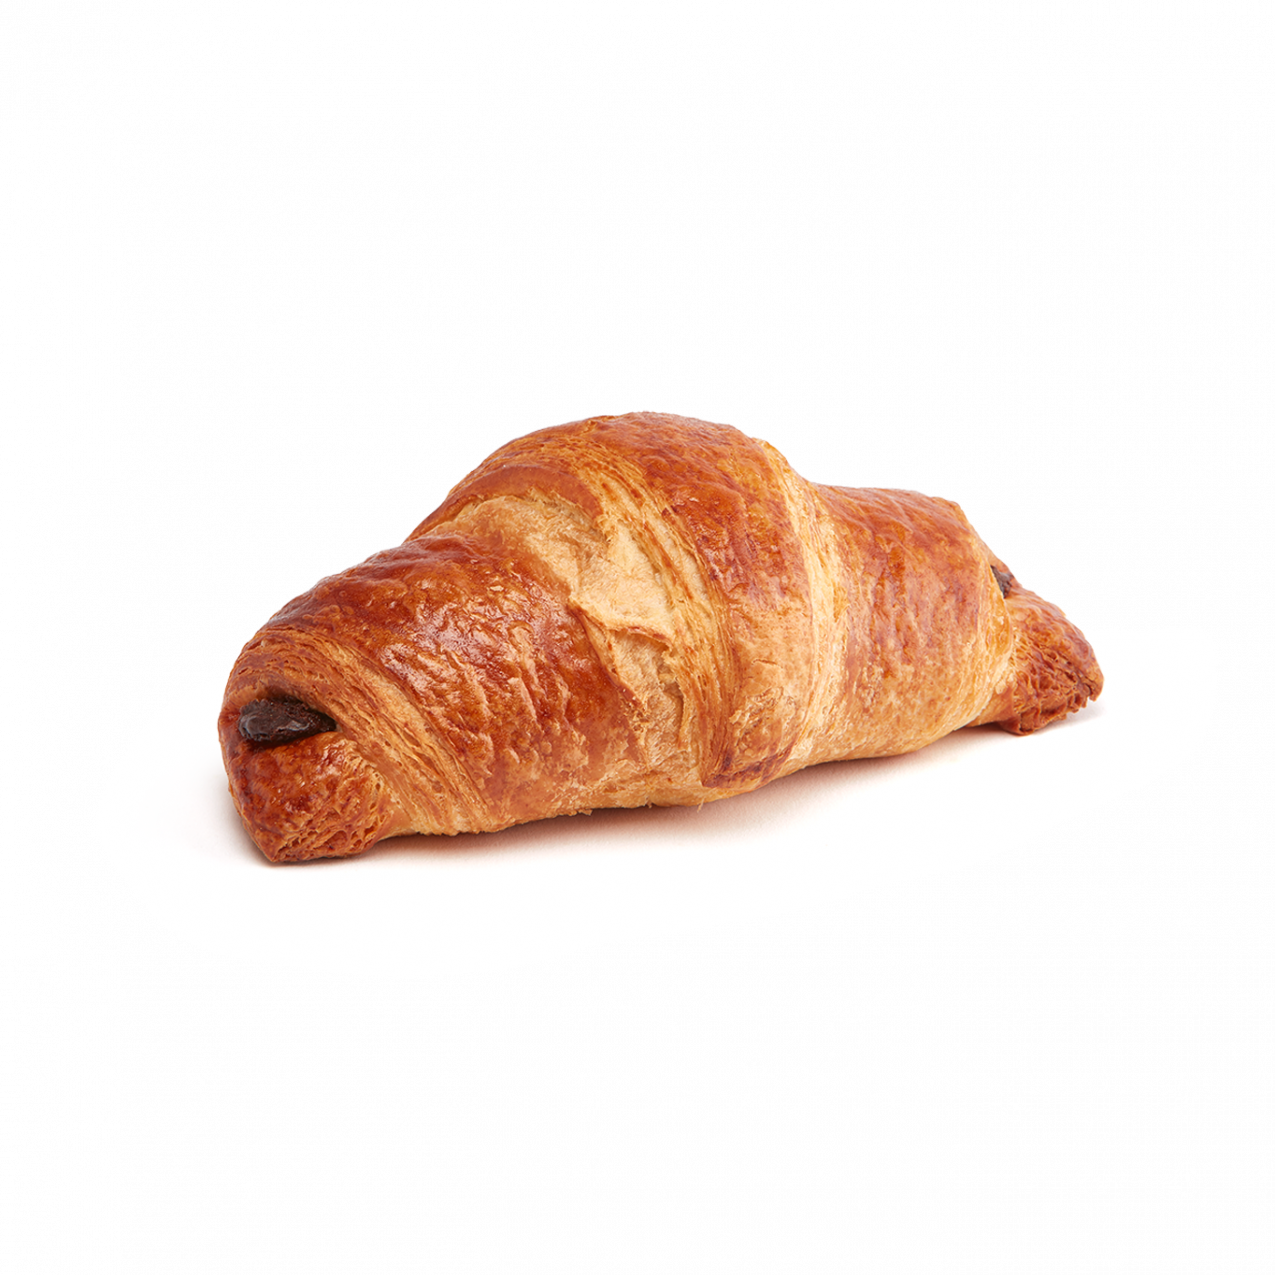 - Choco frozen Pre-baked Croissant 90g pastries bread and Butter Straight Ferm.